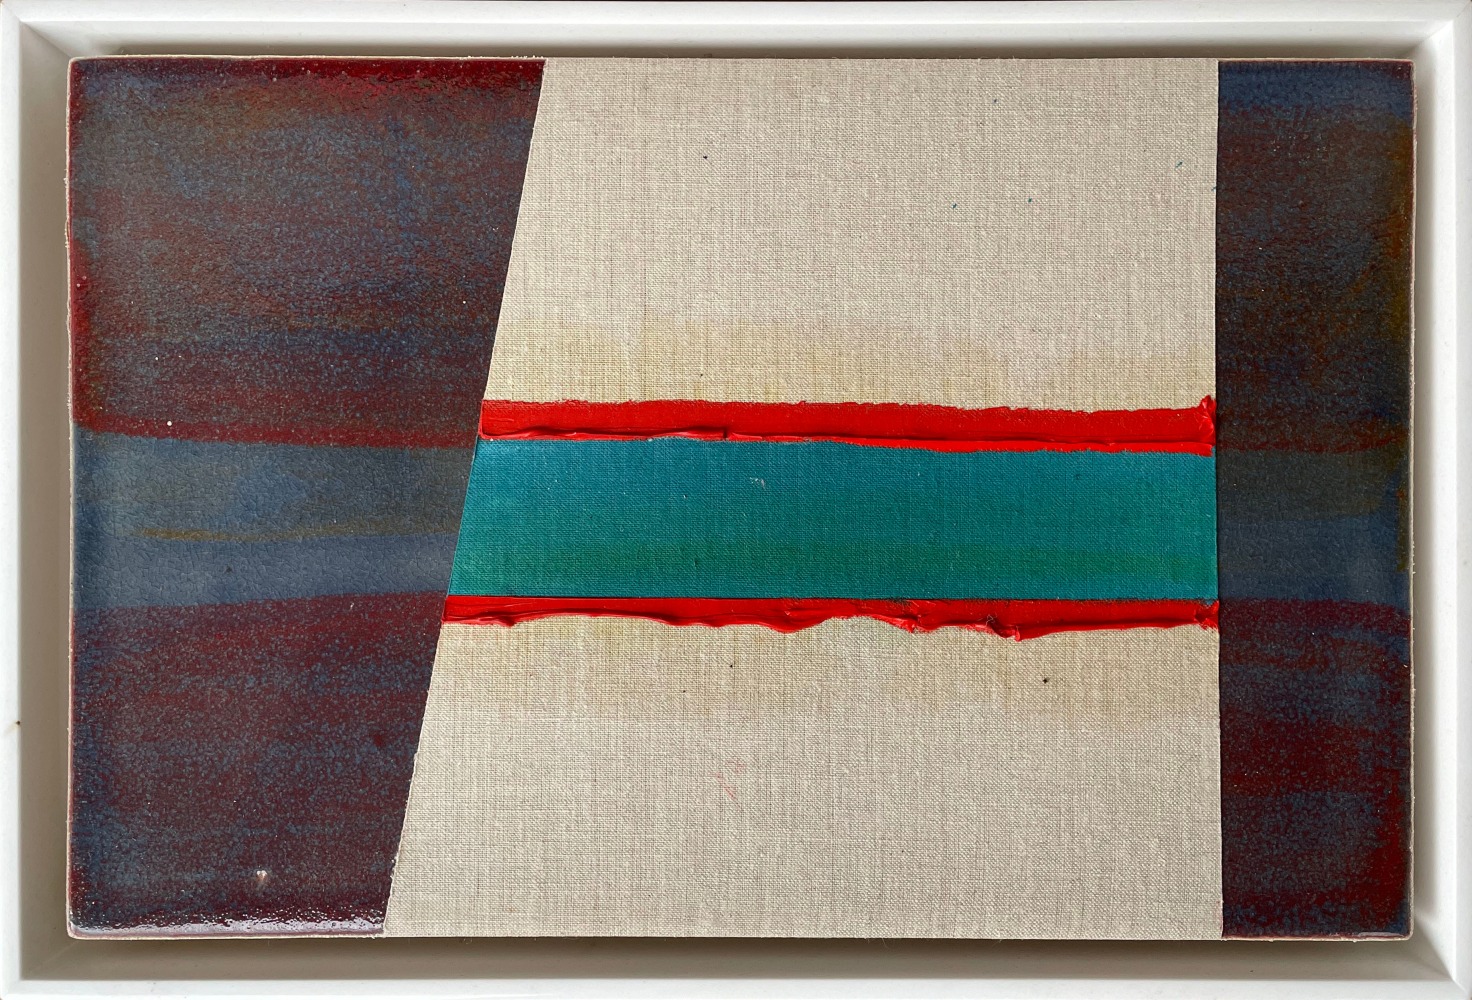 Frank.Olt.Untitled.Encaustic.on.Canvas.with.Ceramic.green.and.red.stripe